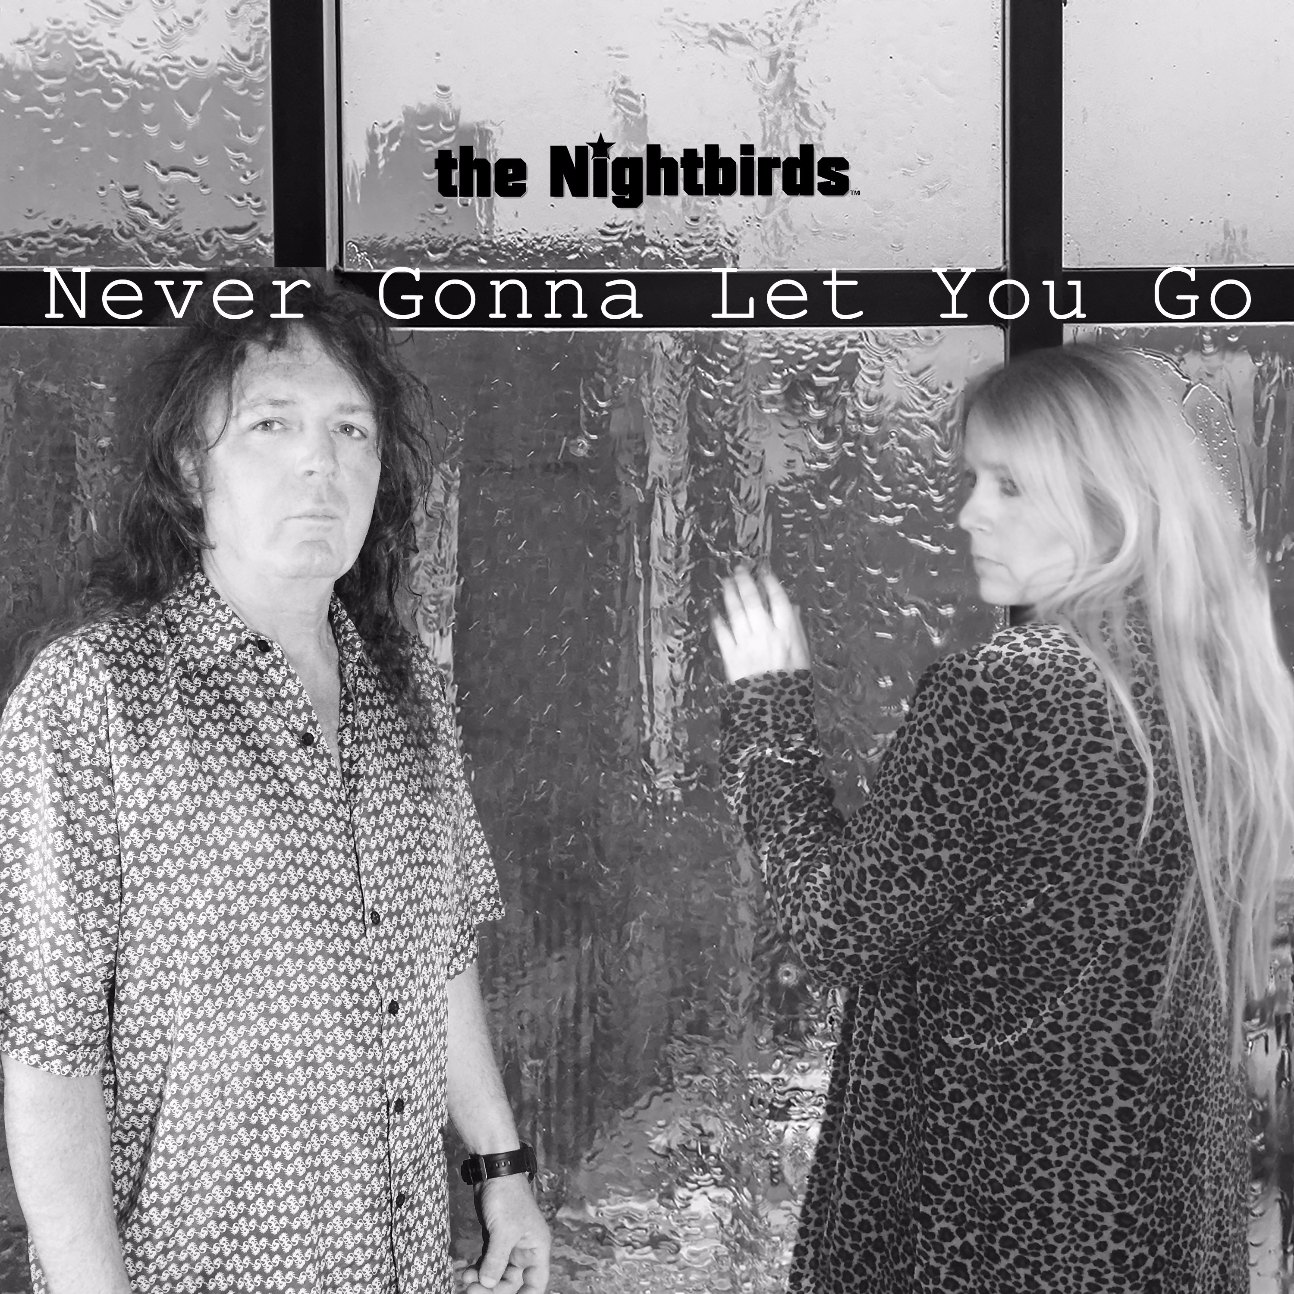 The Nightbirds Never Gonna Let You Go